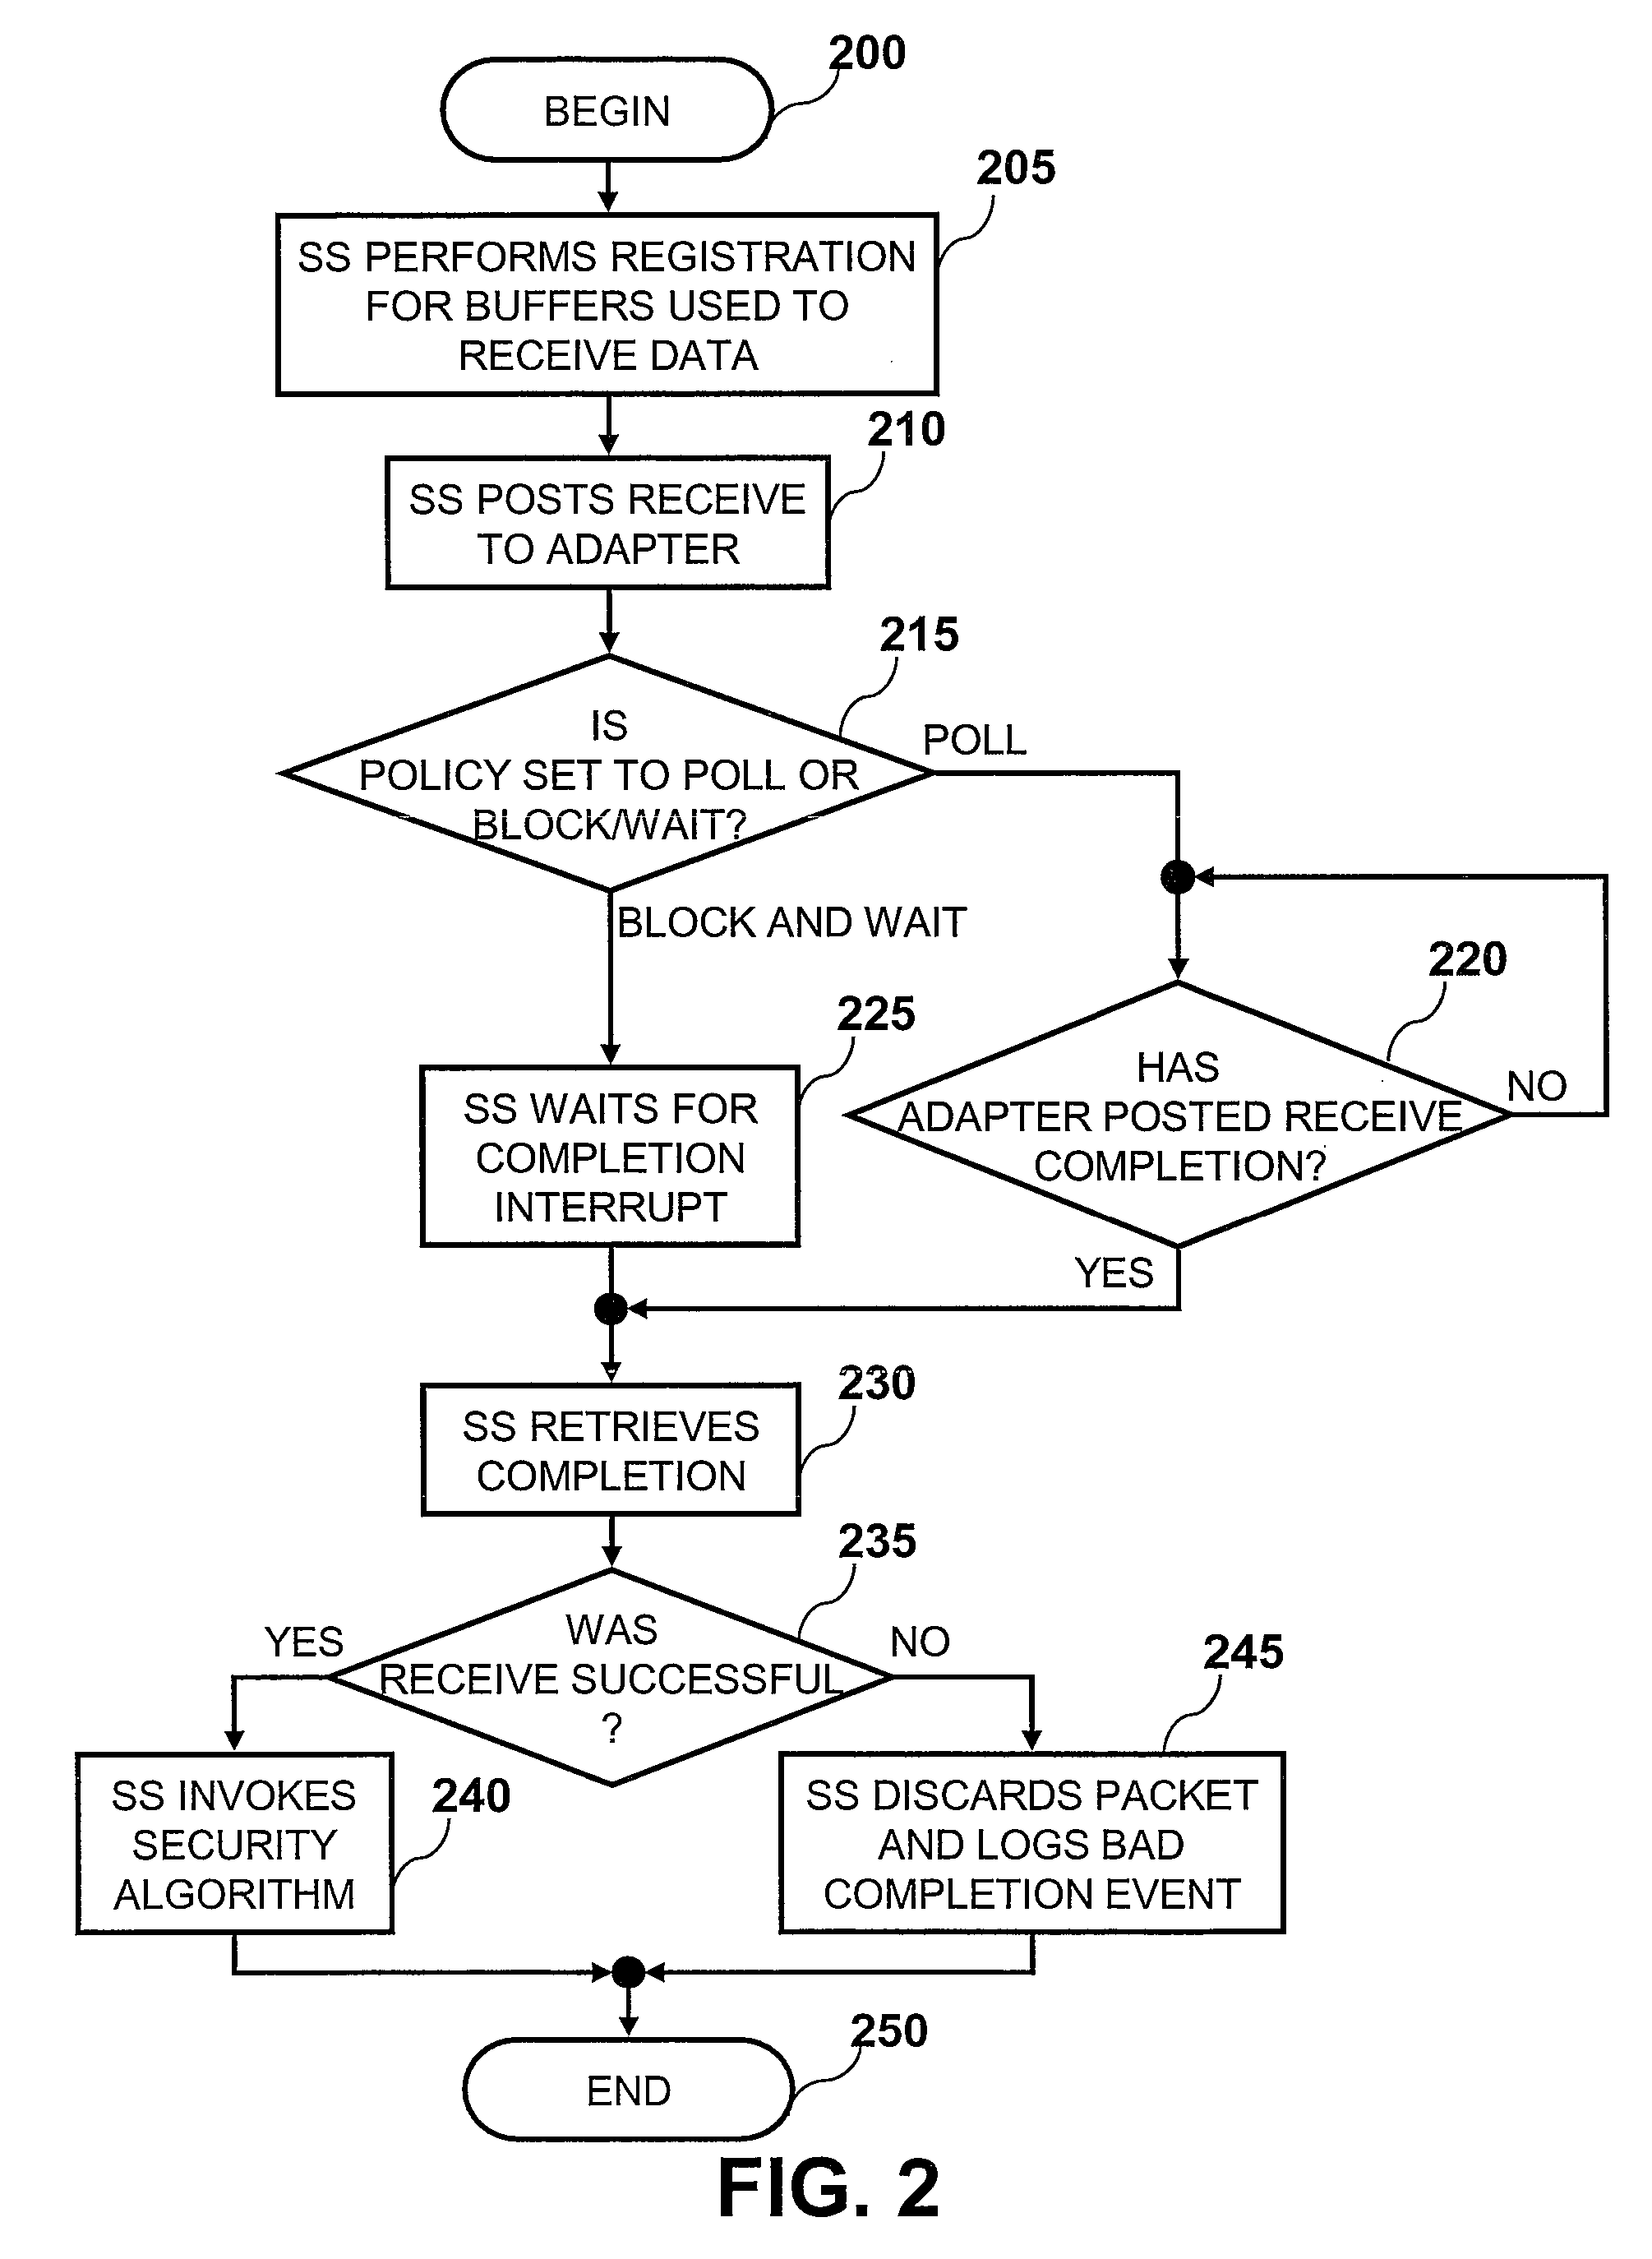 Providing server security via a security sensor application shared by multiple operating system partitions